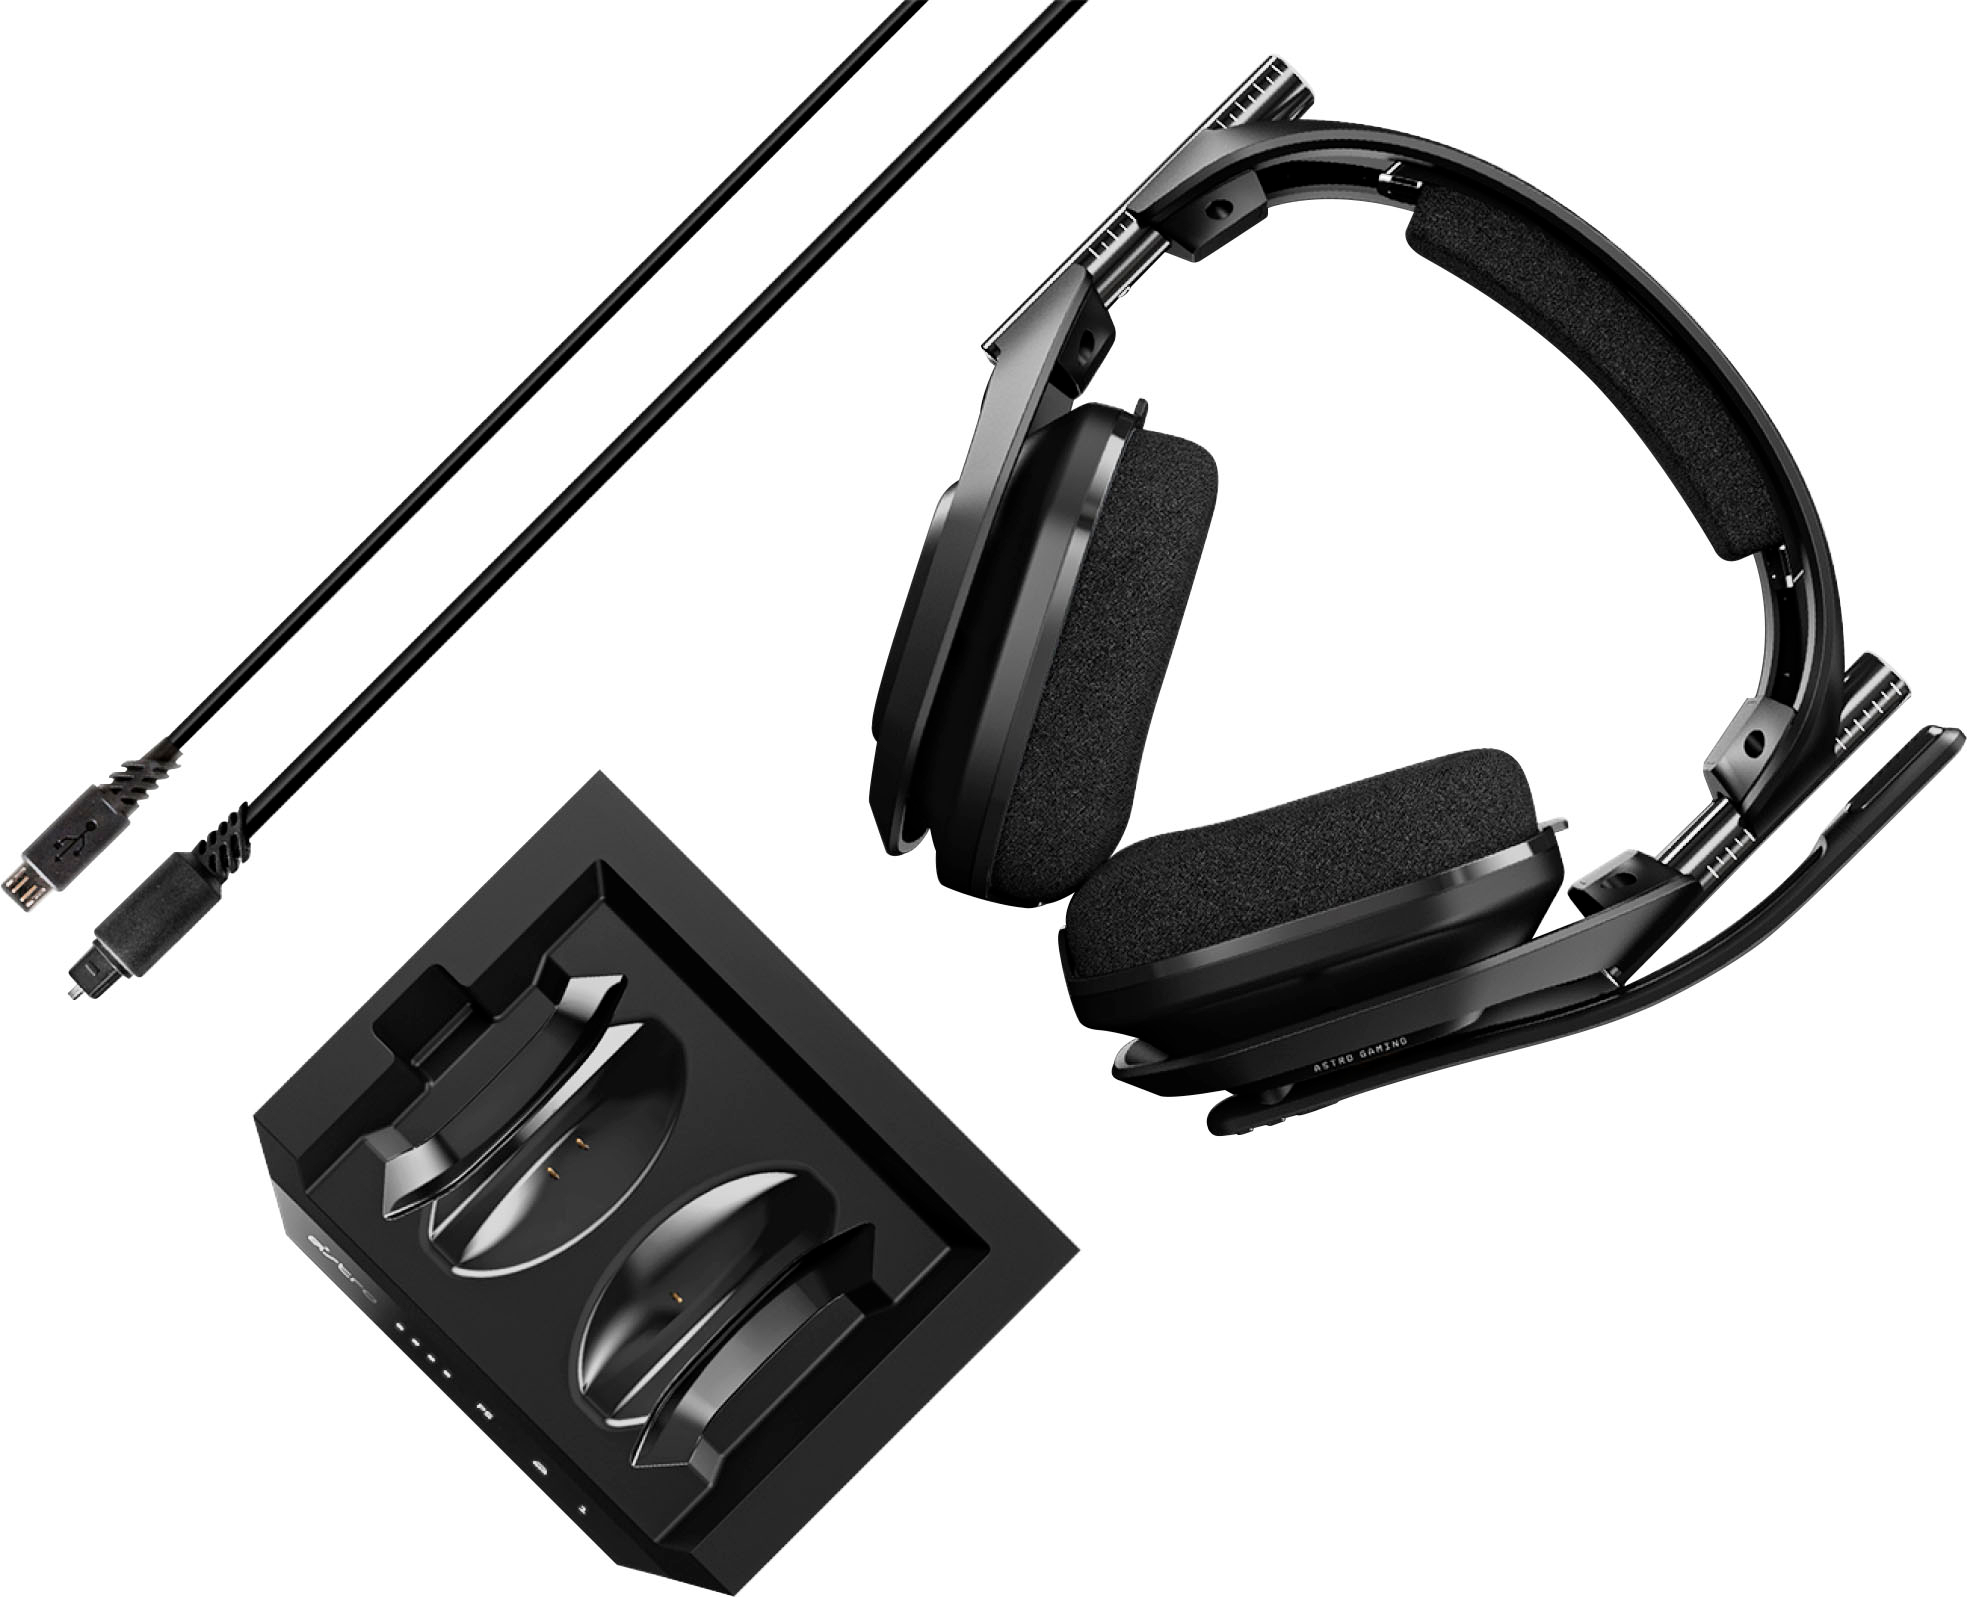 Astro Gaming A50 Gen 4 Wireless Gaming Headset for PS5, PS4 Black  939-001673 - Best Buy